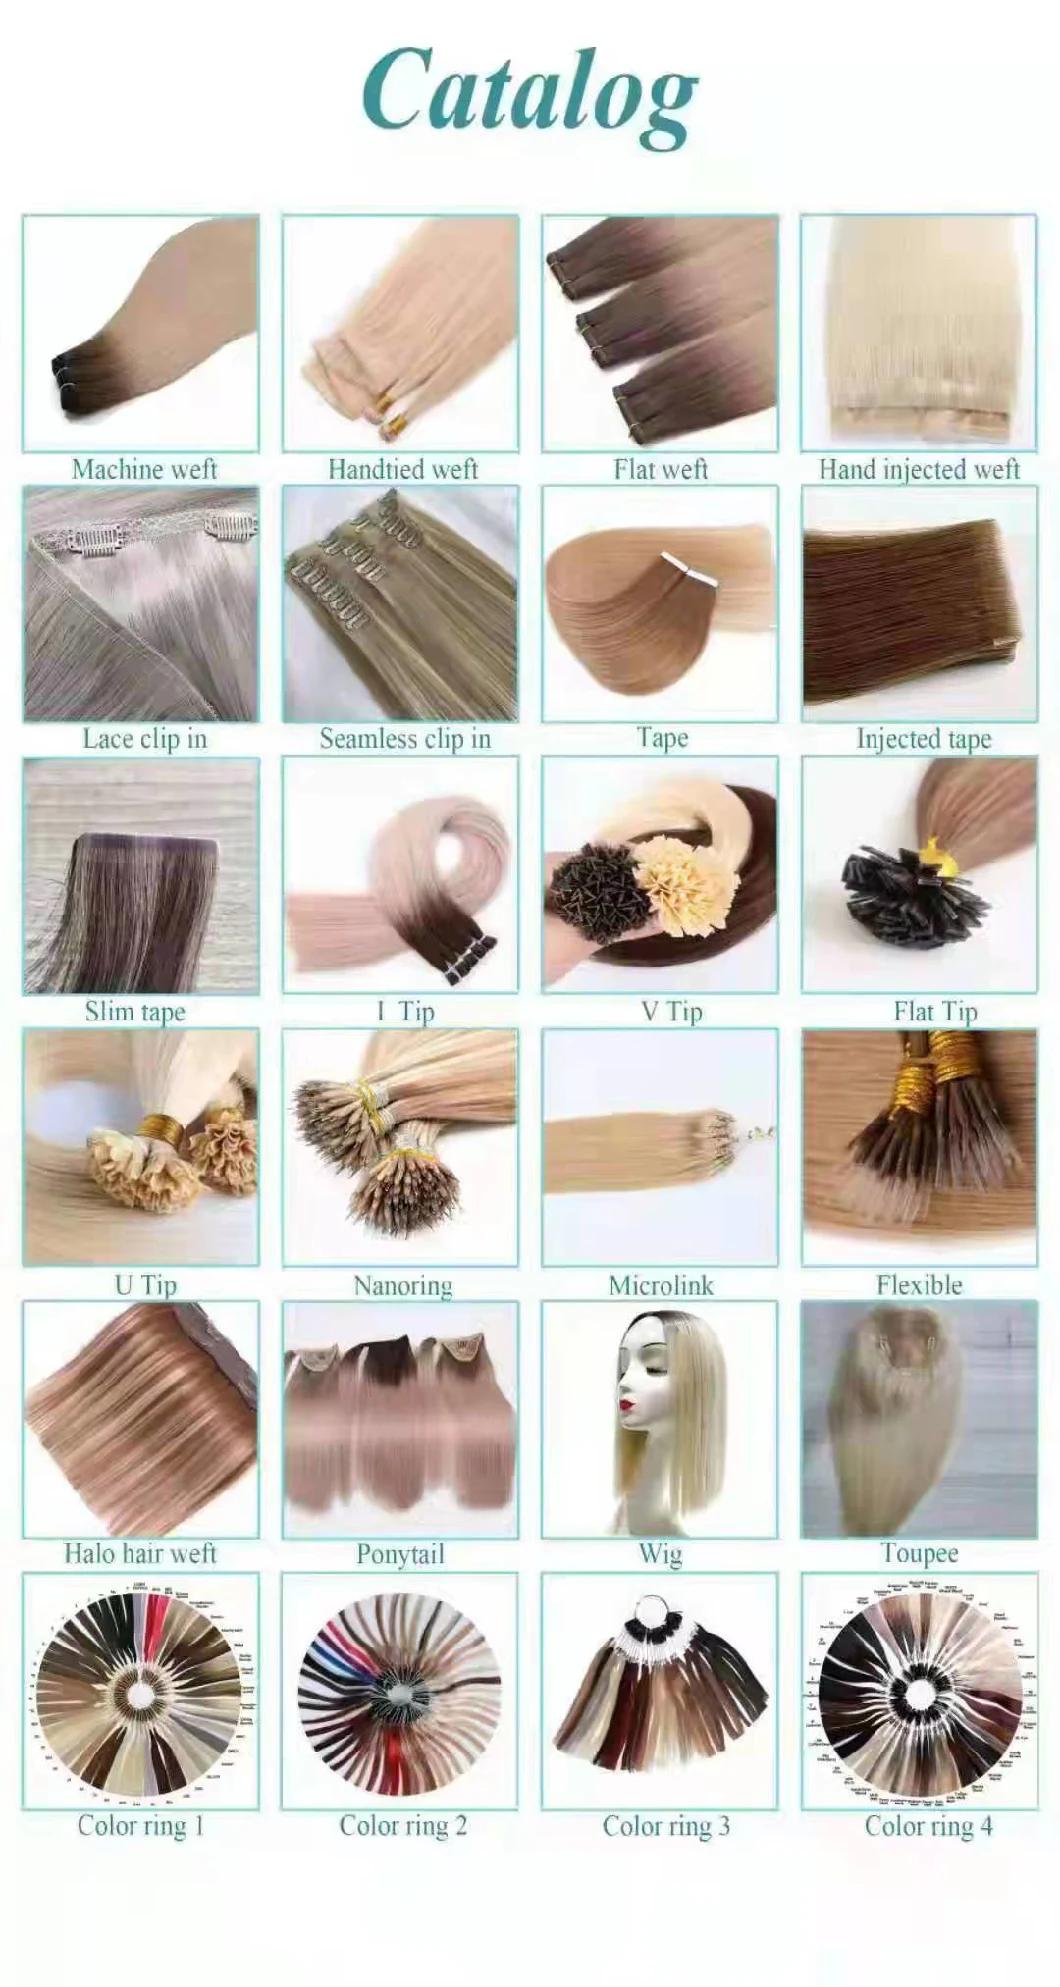 The Best Quality 100% Human Hair, I Tip Hair Extension, Wholesale Human Hair.